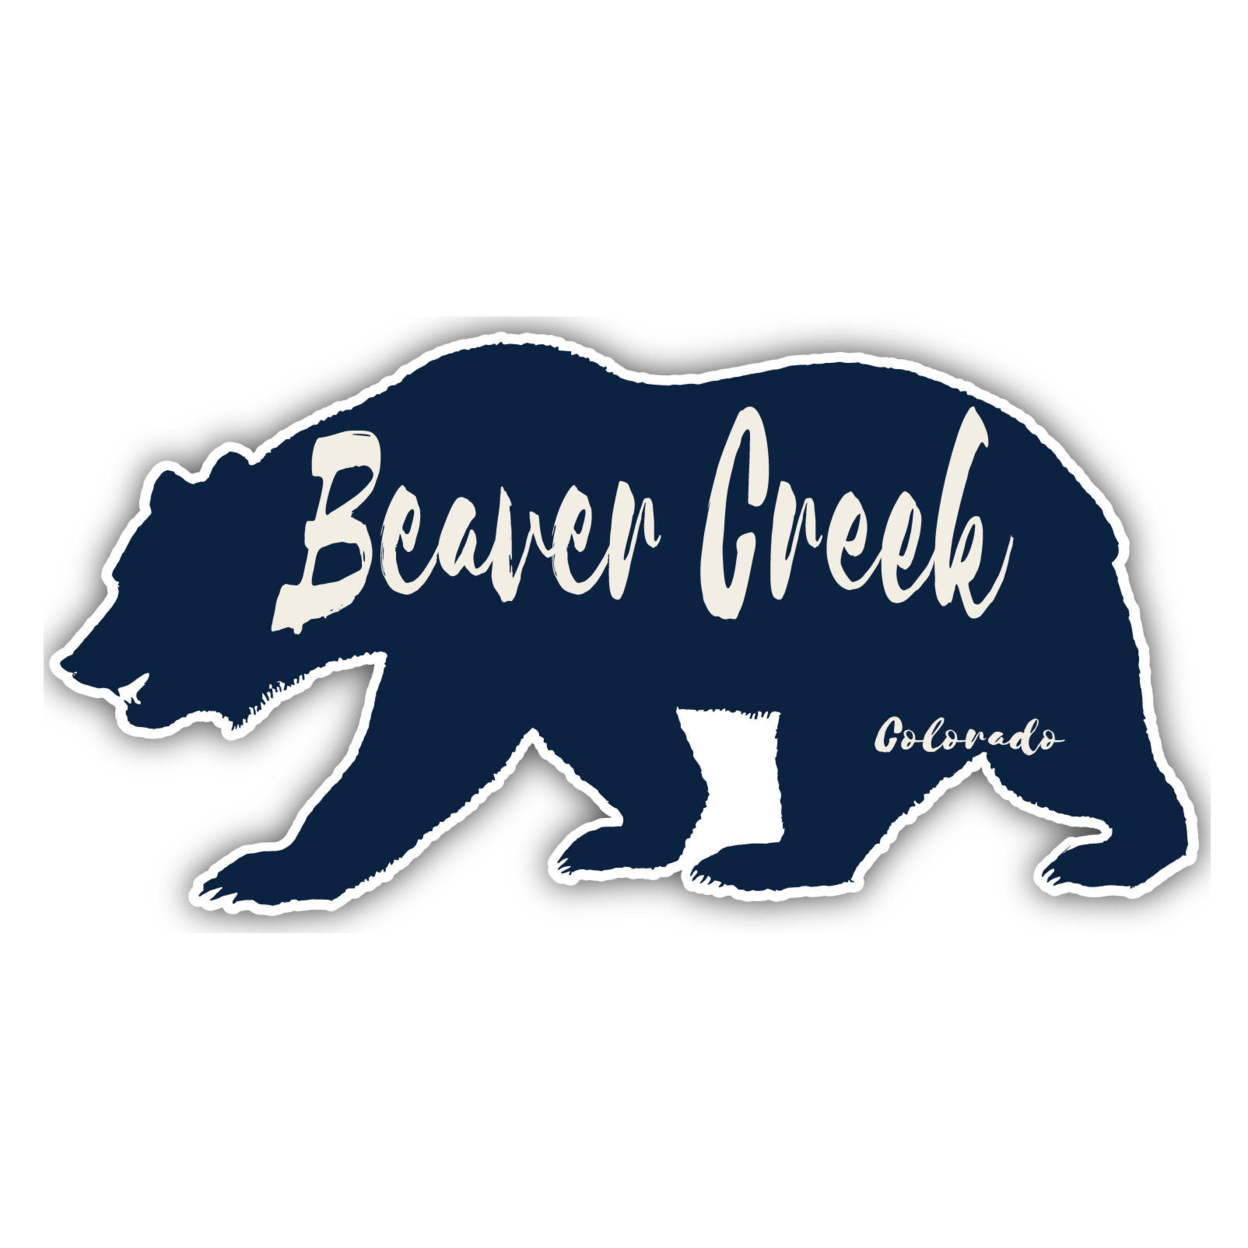 Beaver Creek Colorado Souvenir Decorative Stickers (Choose Theme And Size) - 4-Pack, 8-Inch, Great Outdoors